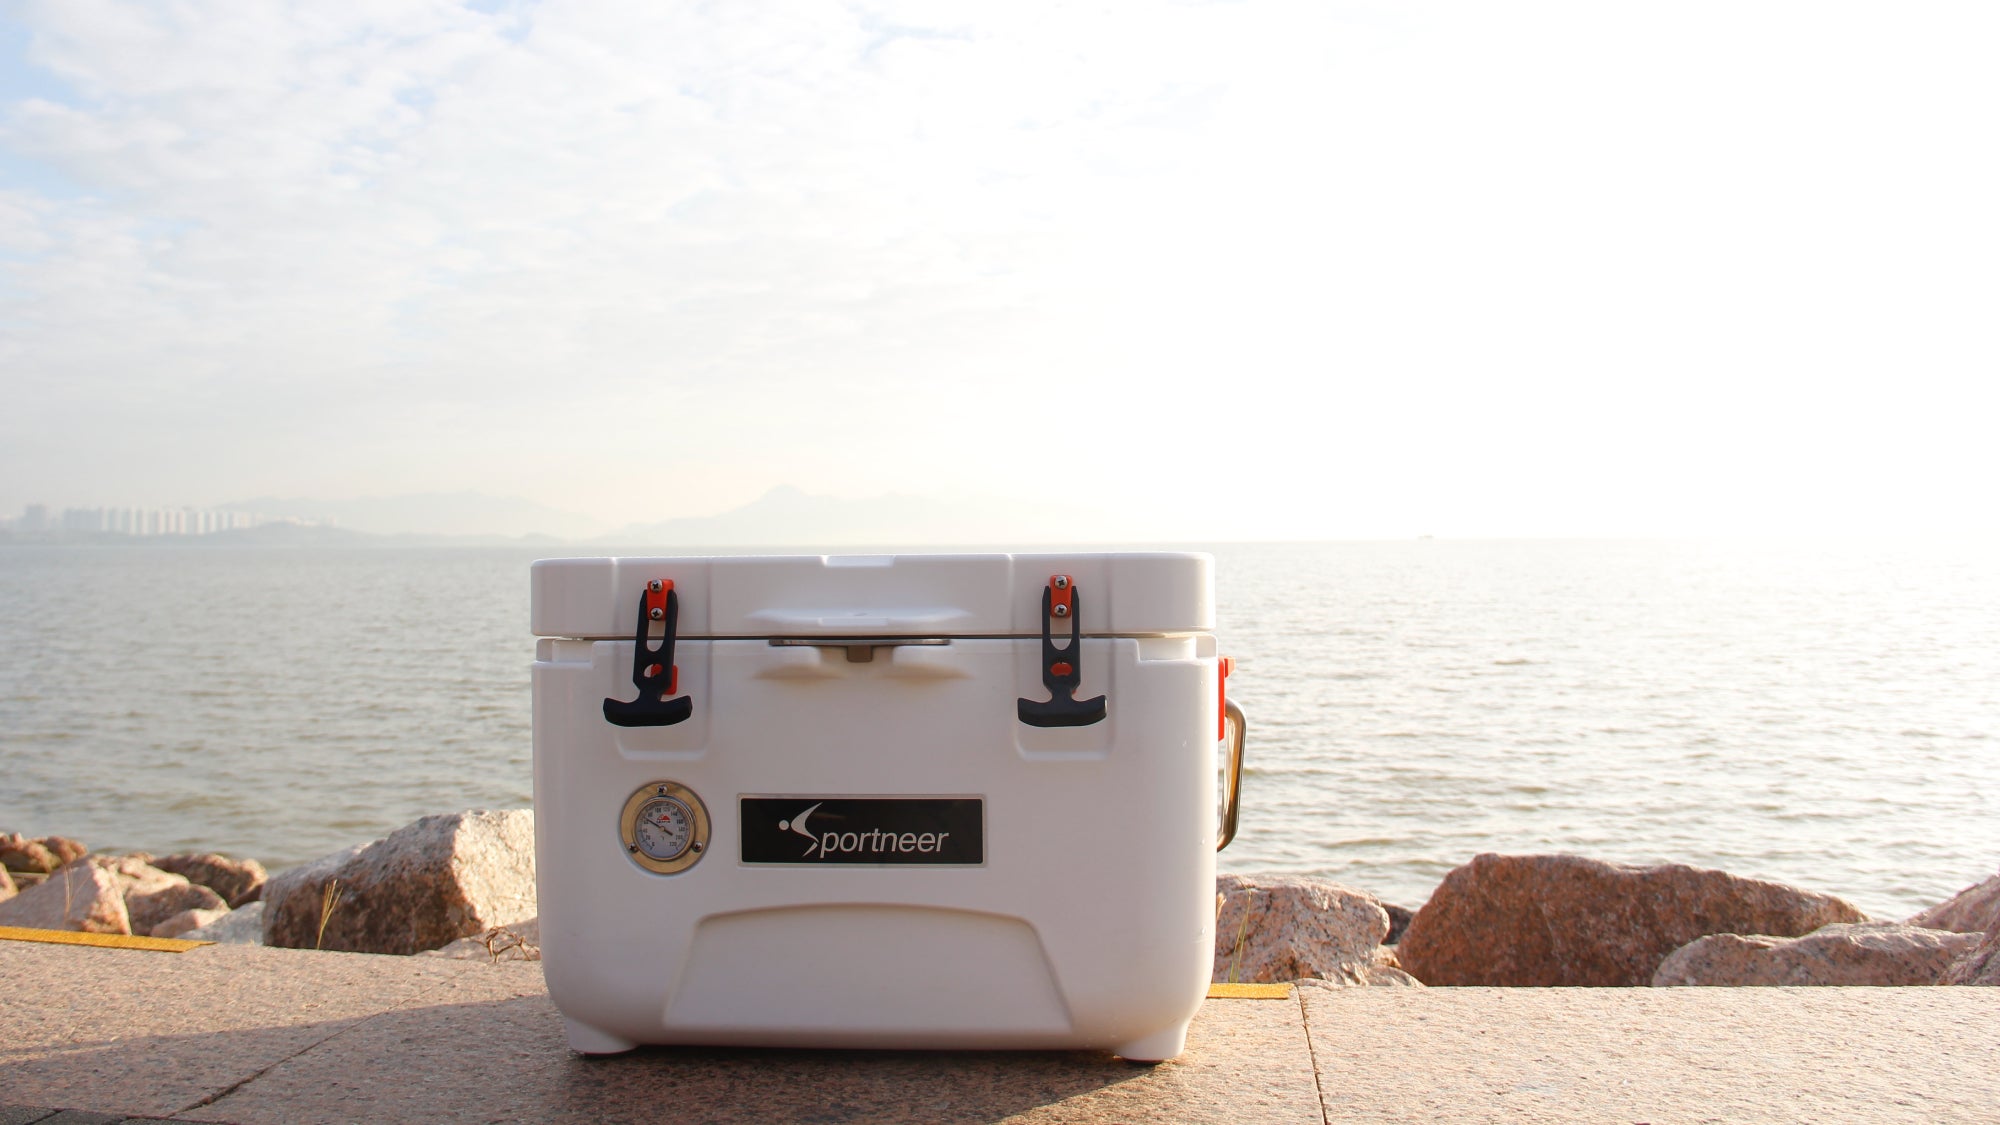 The scientifically ideal way to pack a cooler